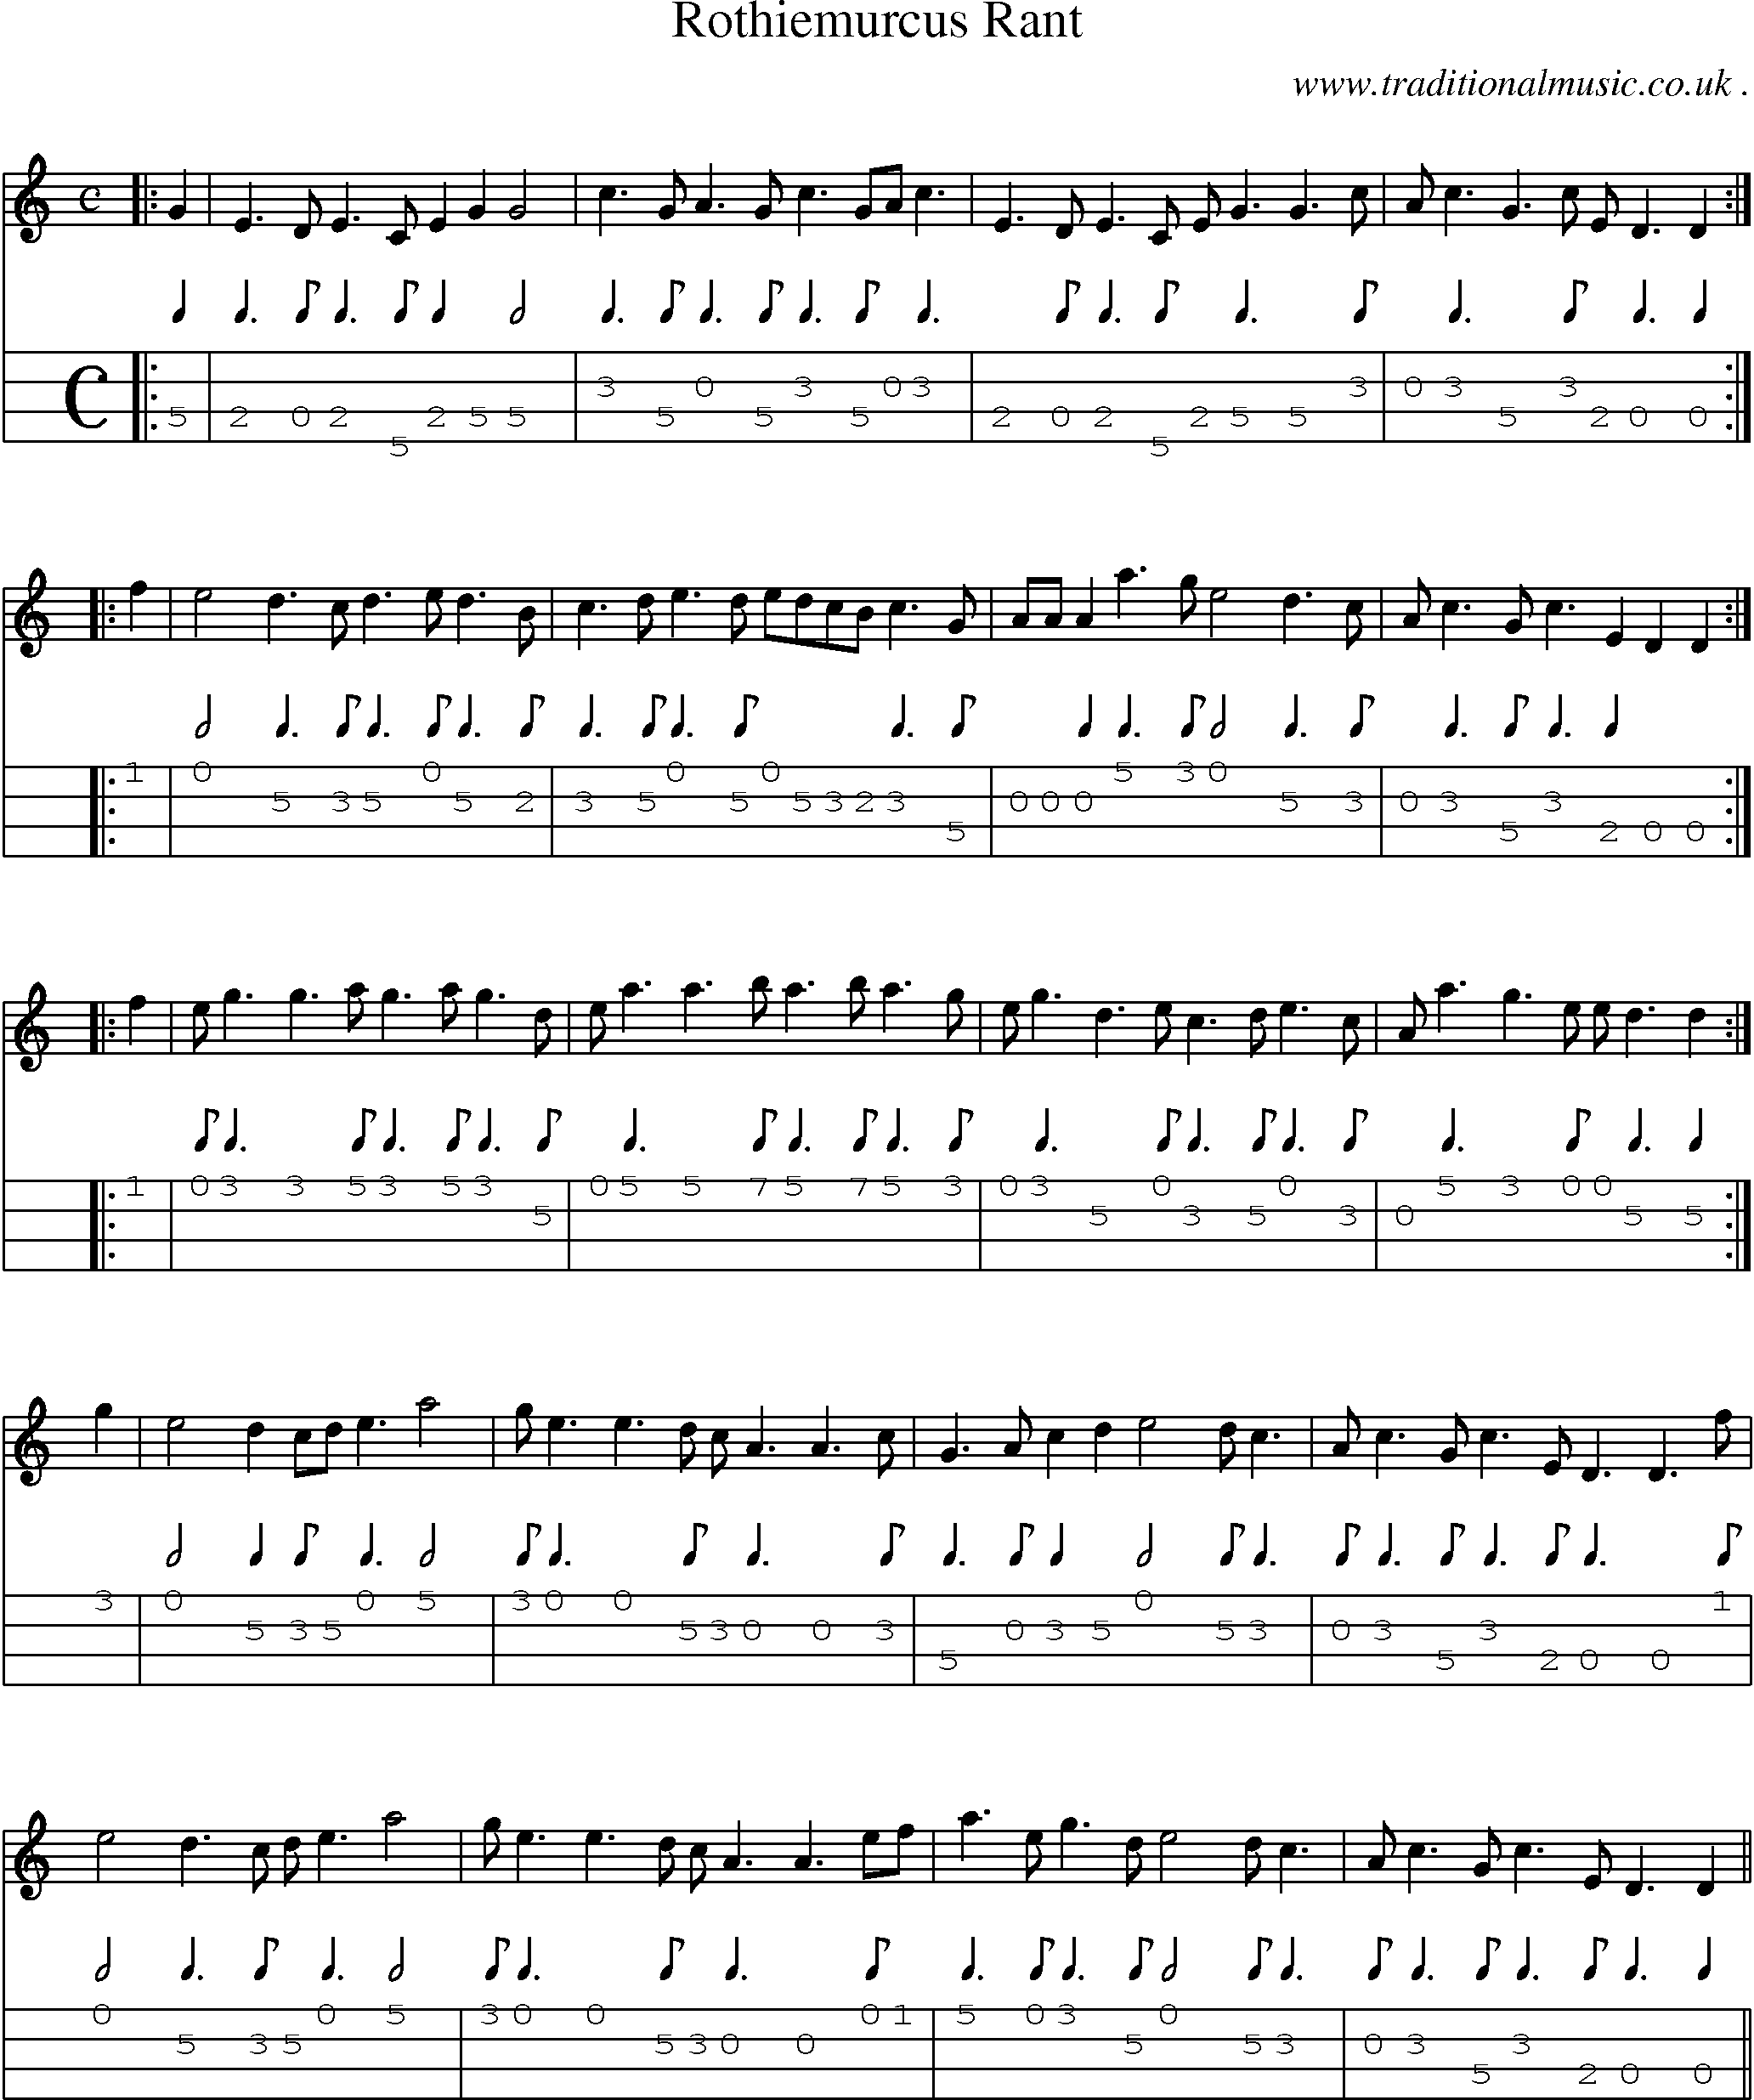 Sheet-Music and Mandolin Tabs for Rothiemurcus Rant